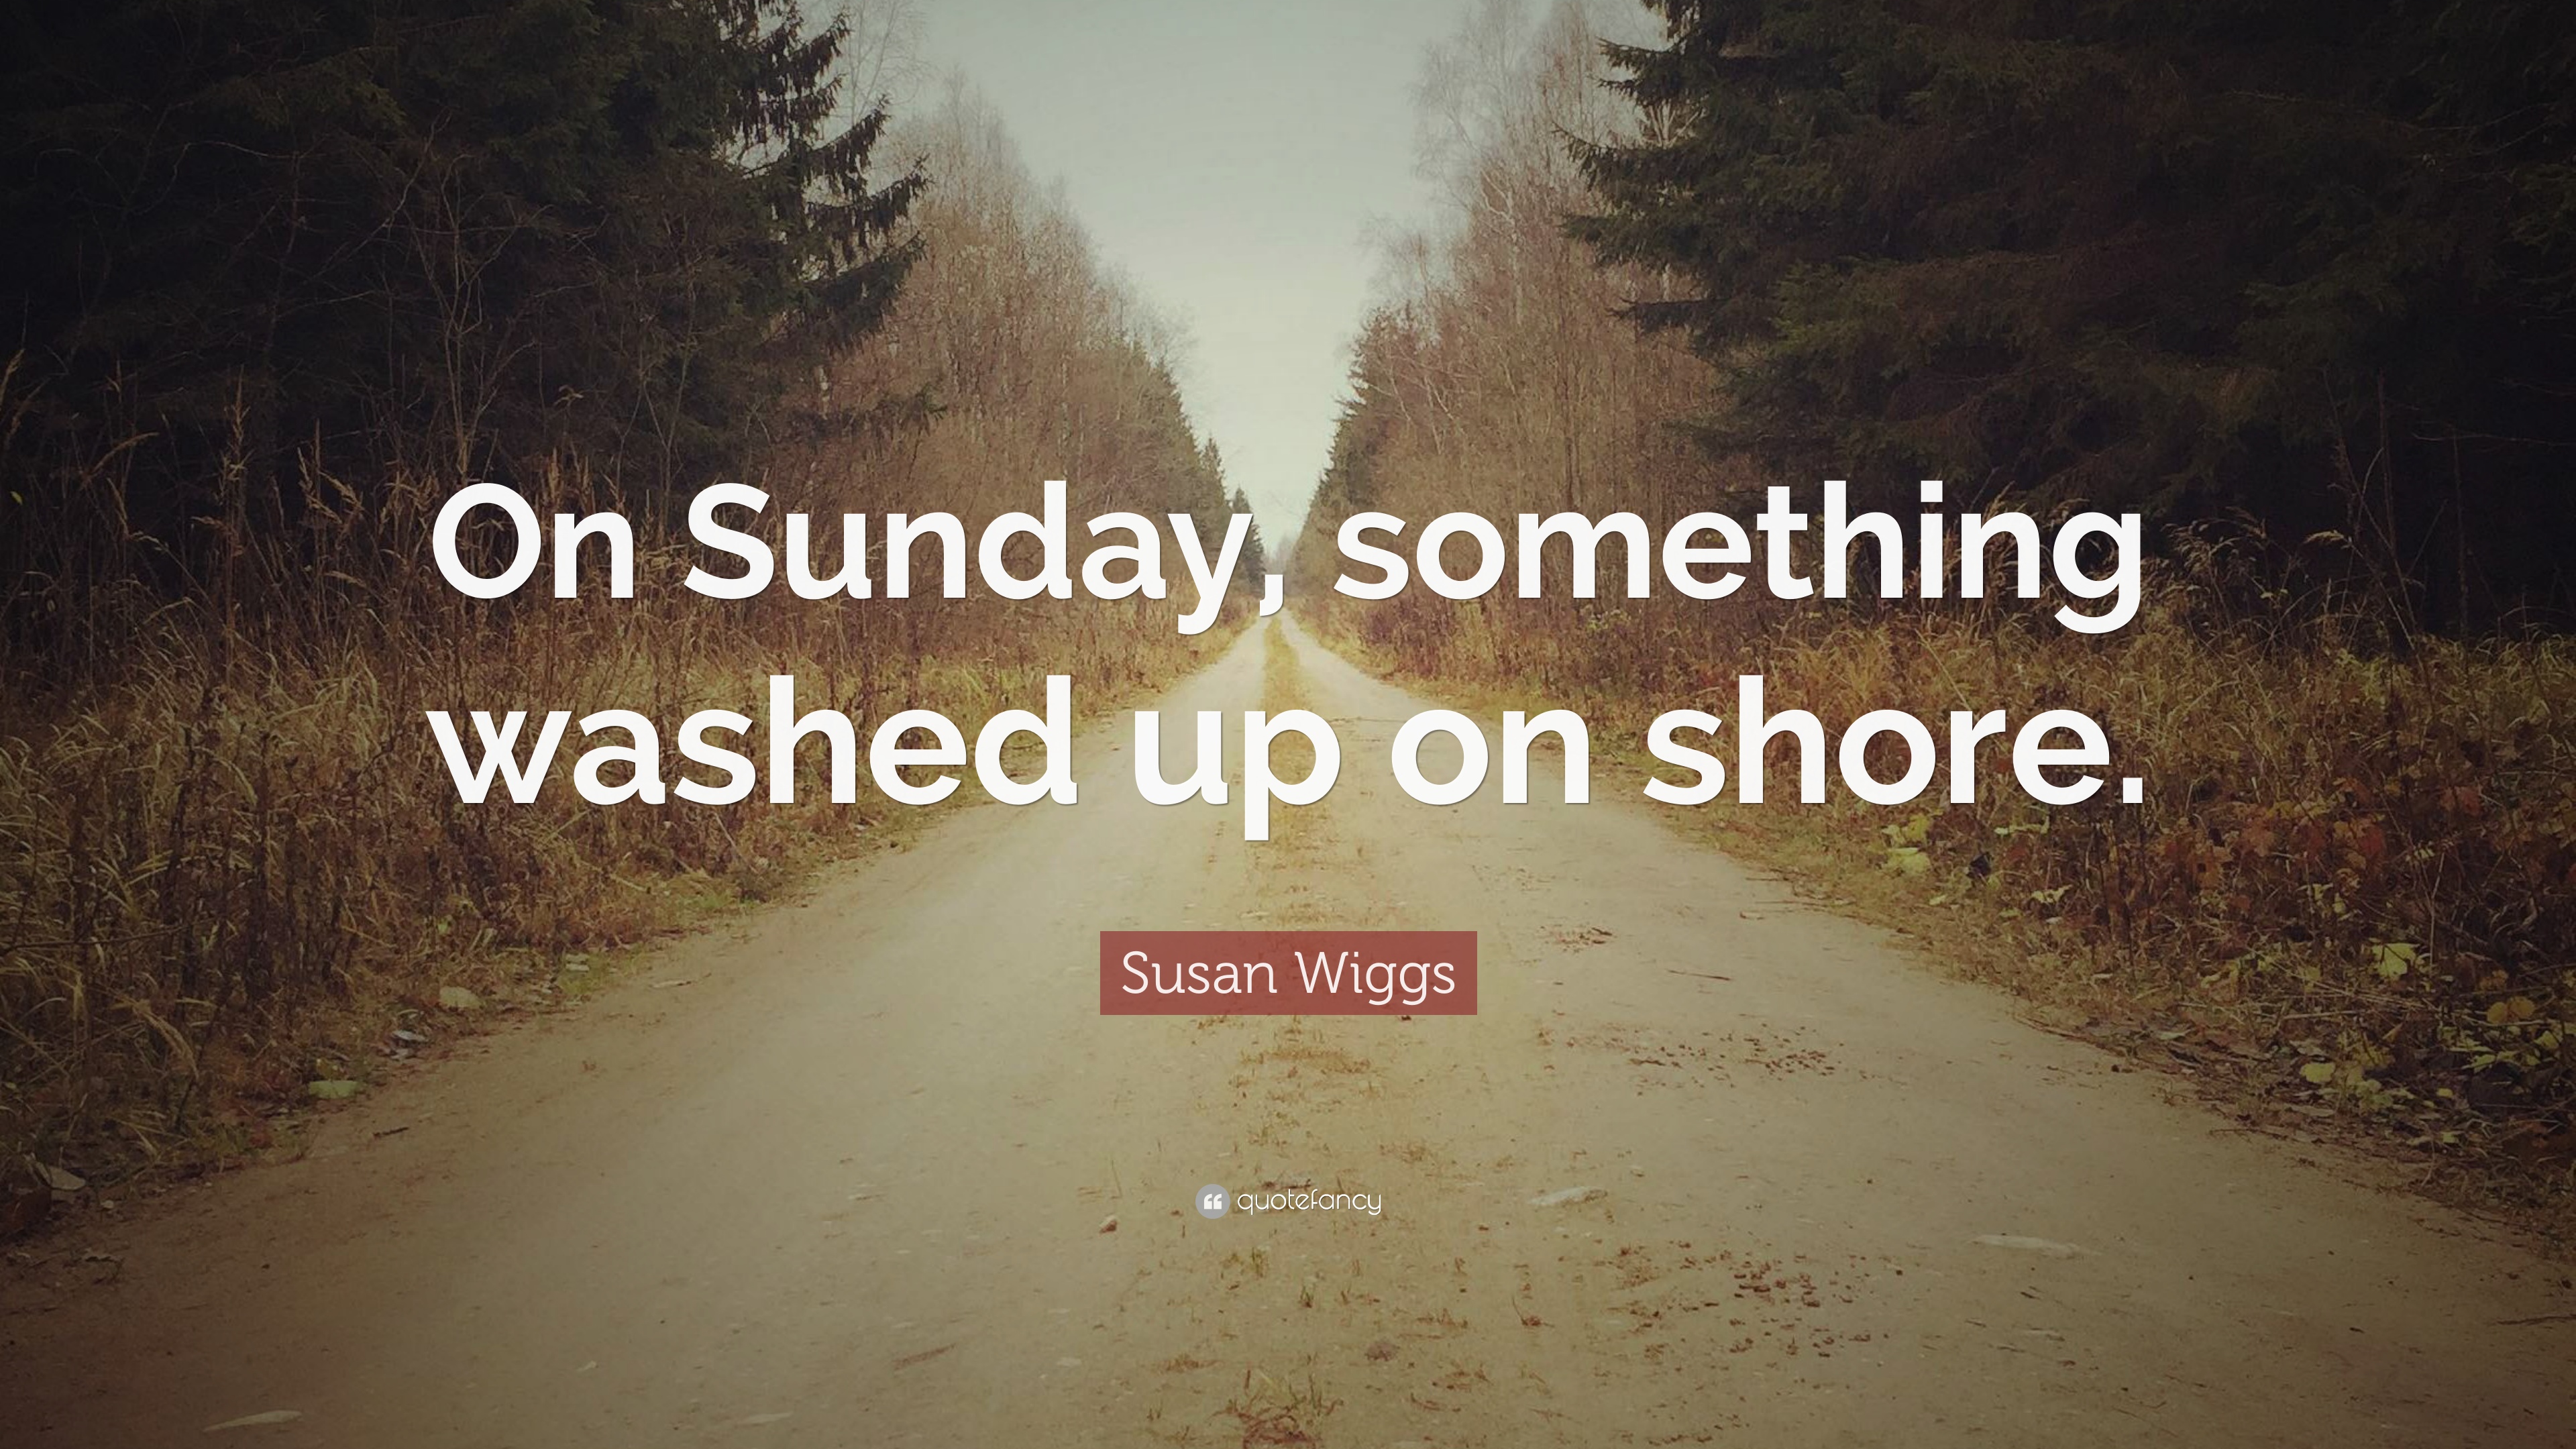 Susan Wiggs Quote: “On Sunday, something washed up on shore.” 7